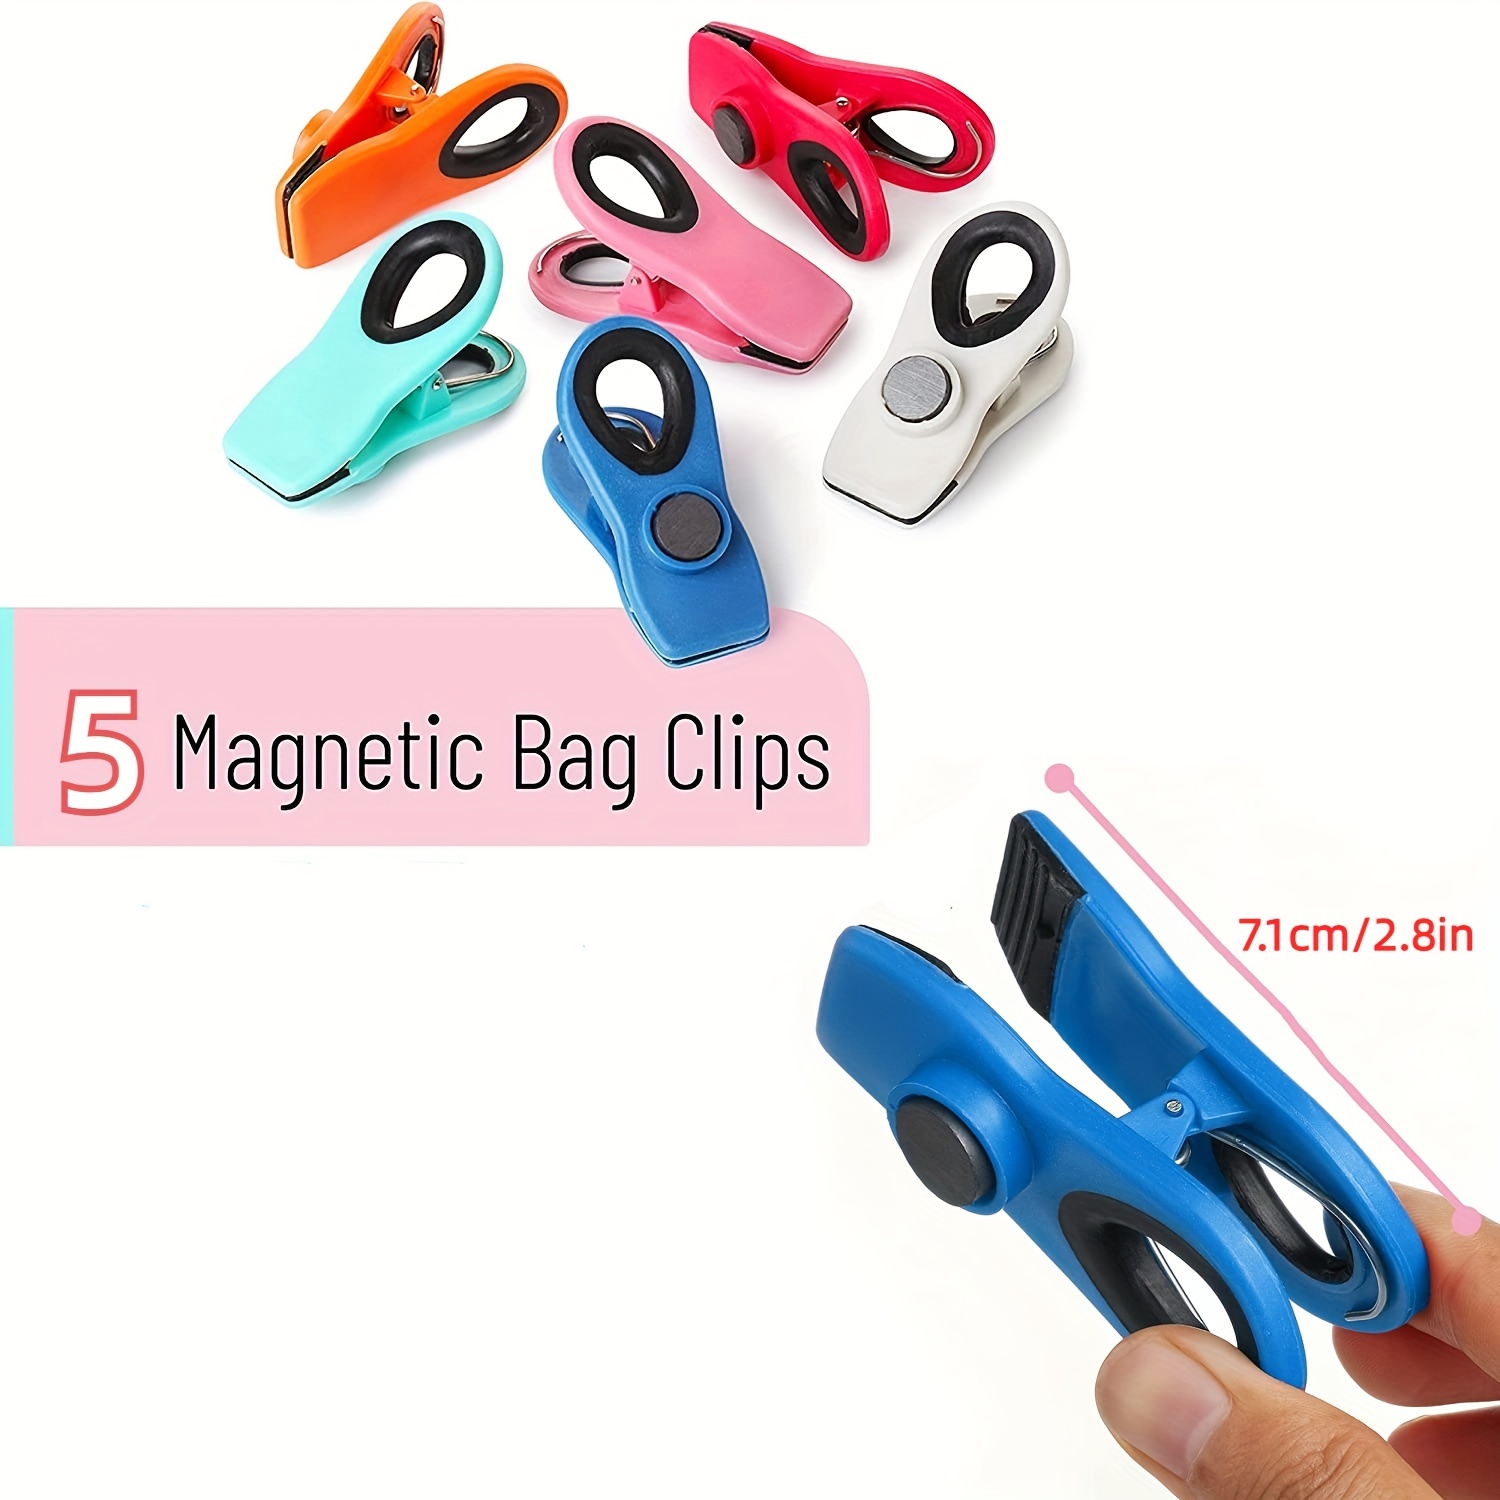 10 Pack Magnetic Chip Clips Bag Clips Food Clips, Plastic Bag Clips for  Chips, Clips for Food Packages, Kitchen Clips with Magnet for Snack Bags  and